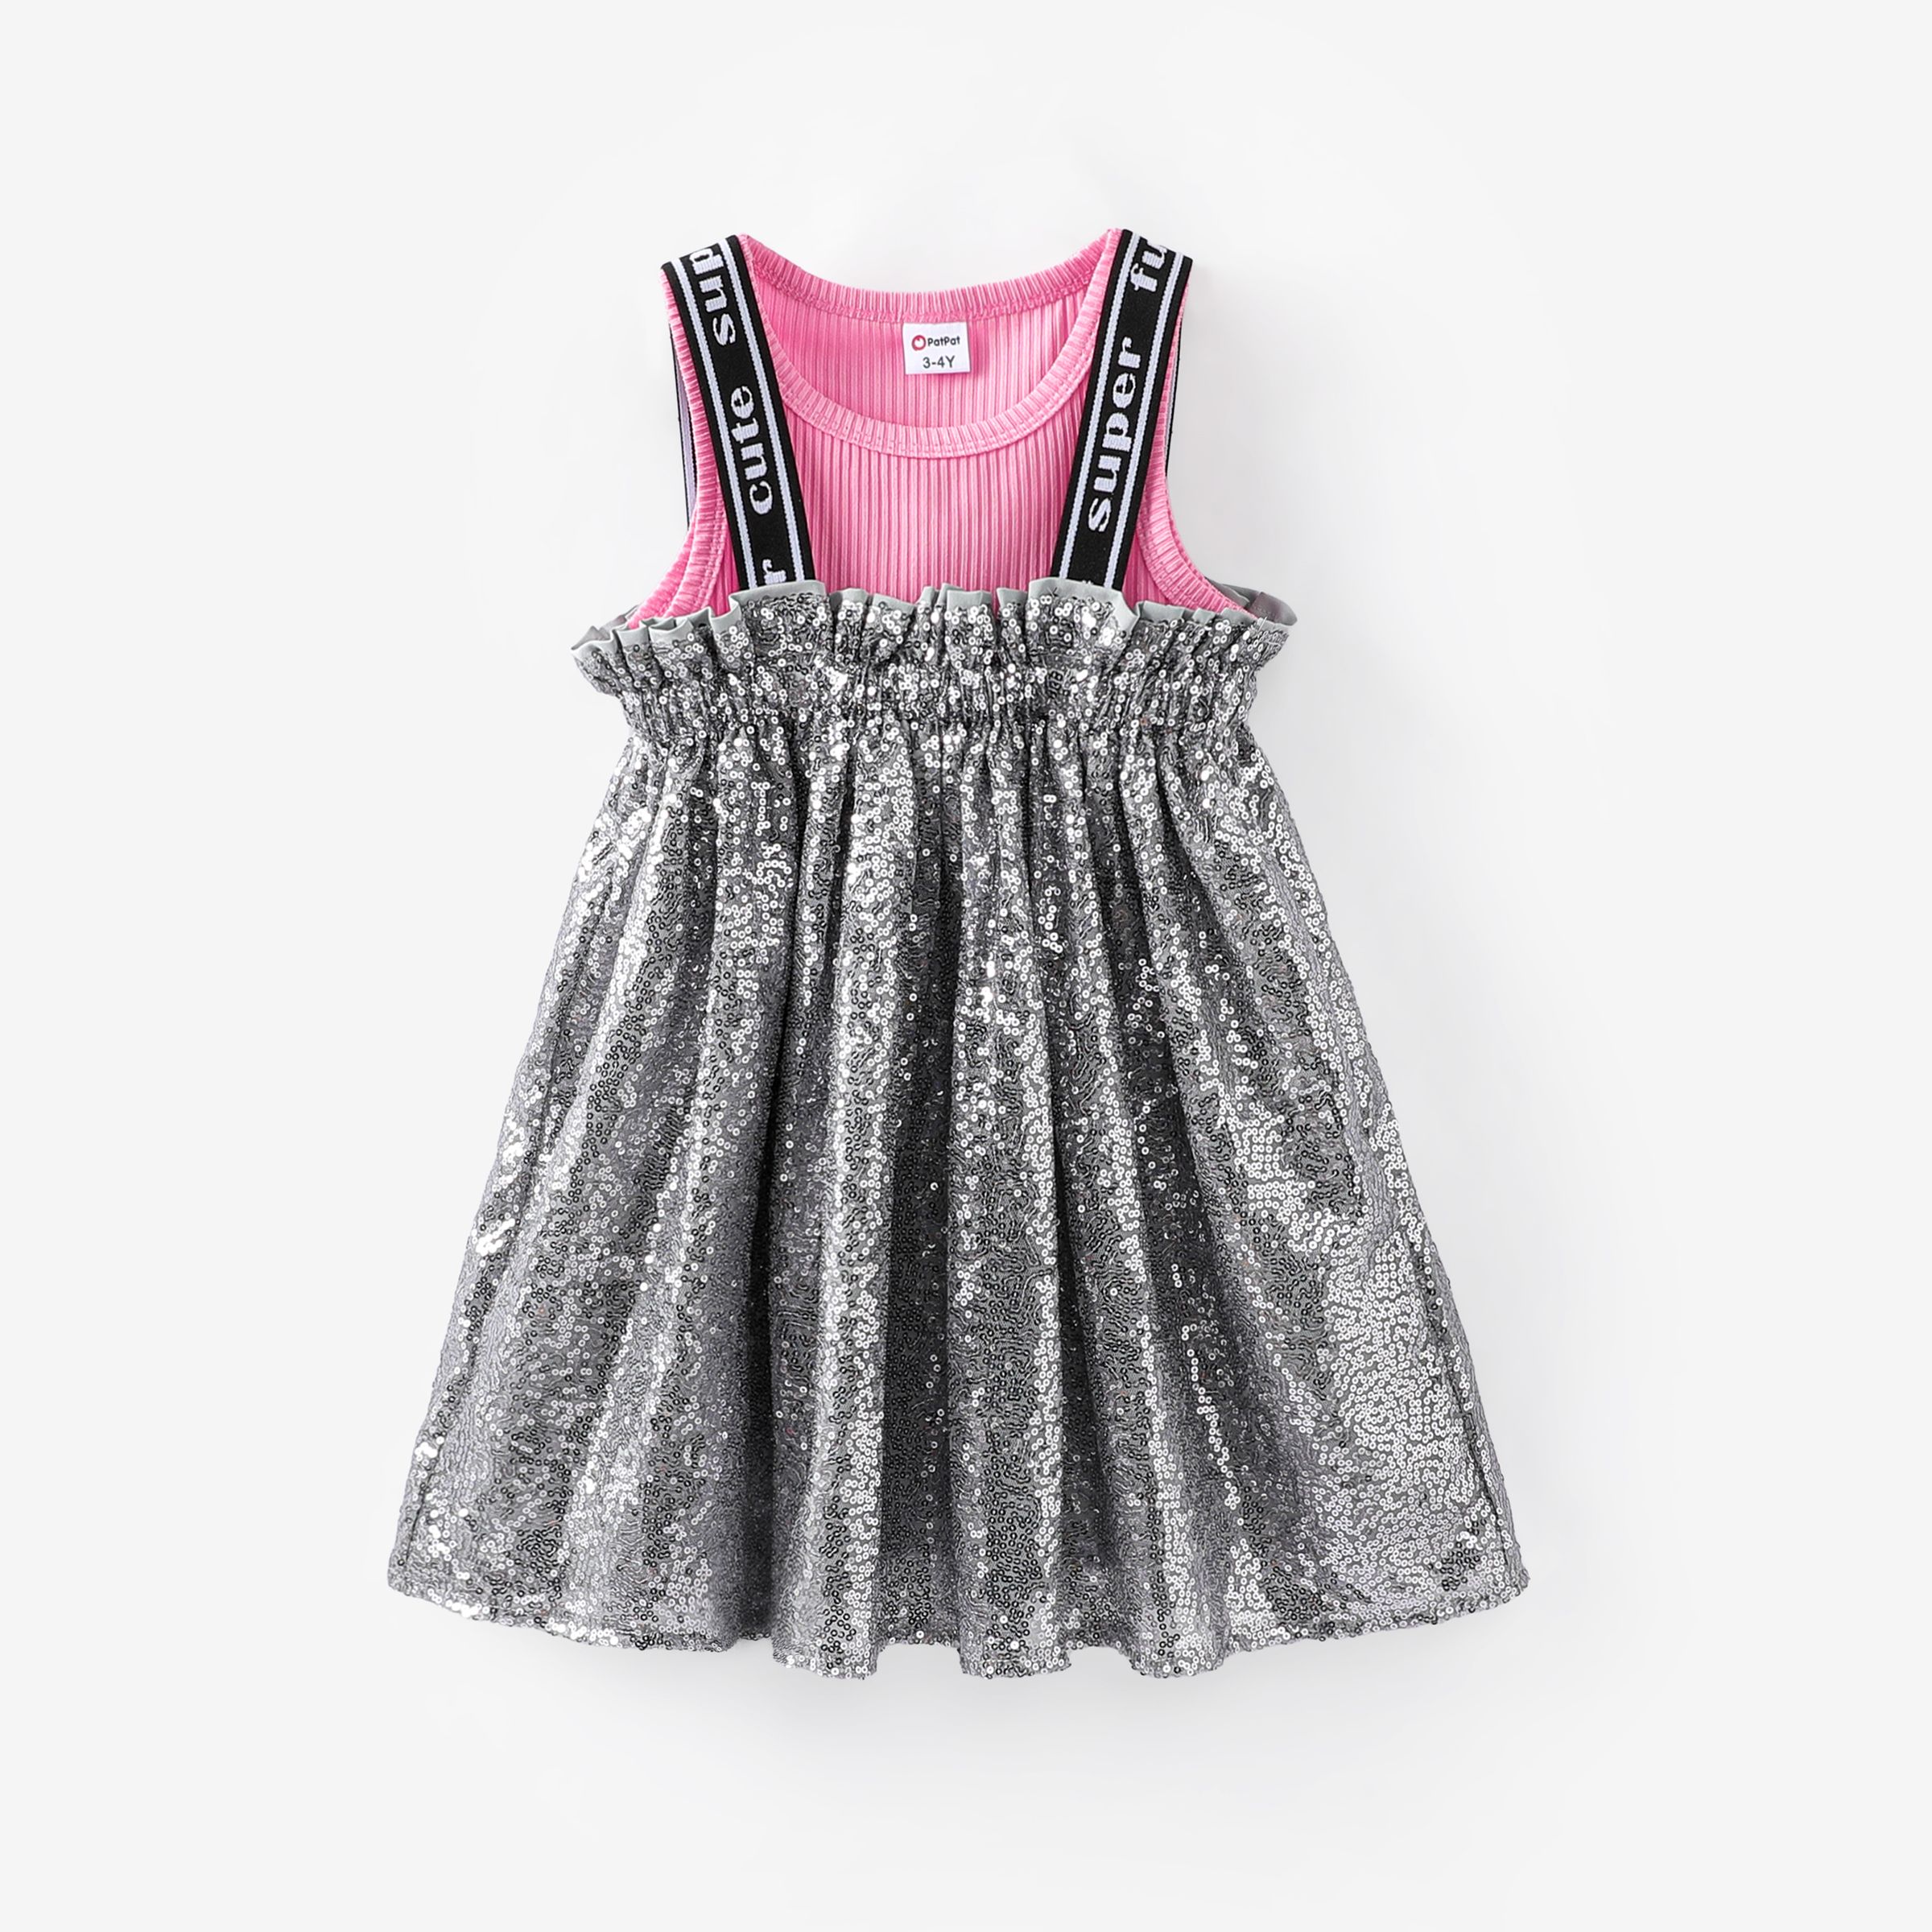 Toddler/Kid Girl 2pcs Solid Tank Top And Sequin Fabric Cami Dress Set/ 5 Pairs Of Socks/ Retro Boots